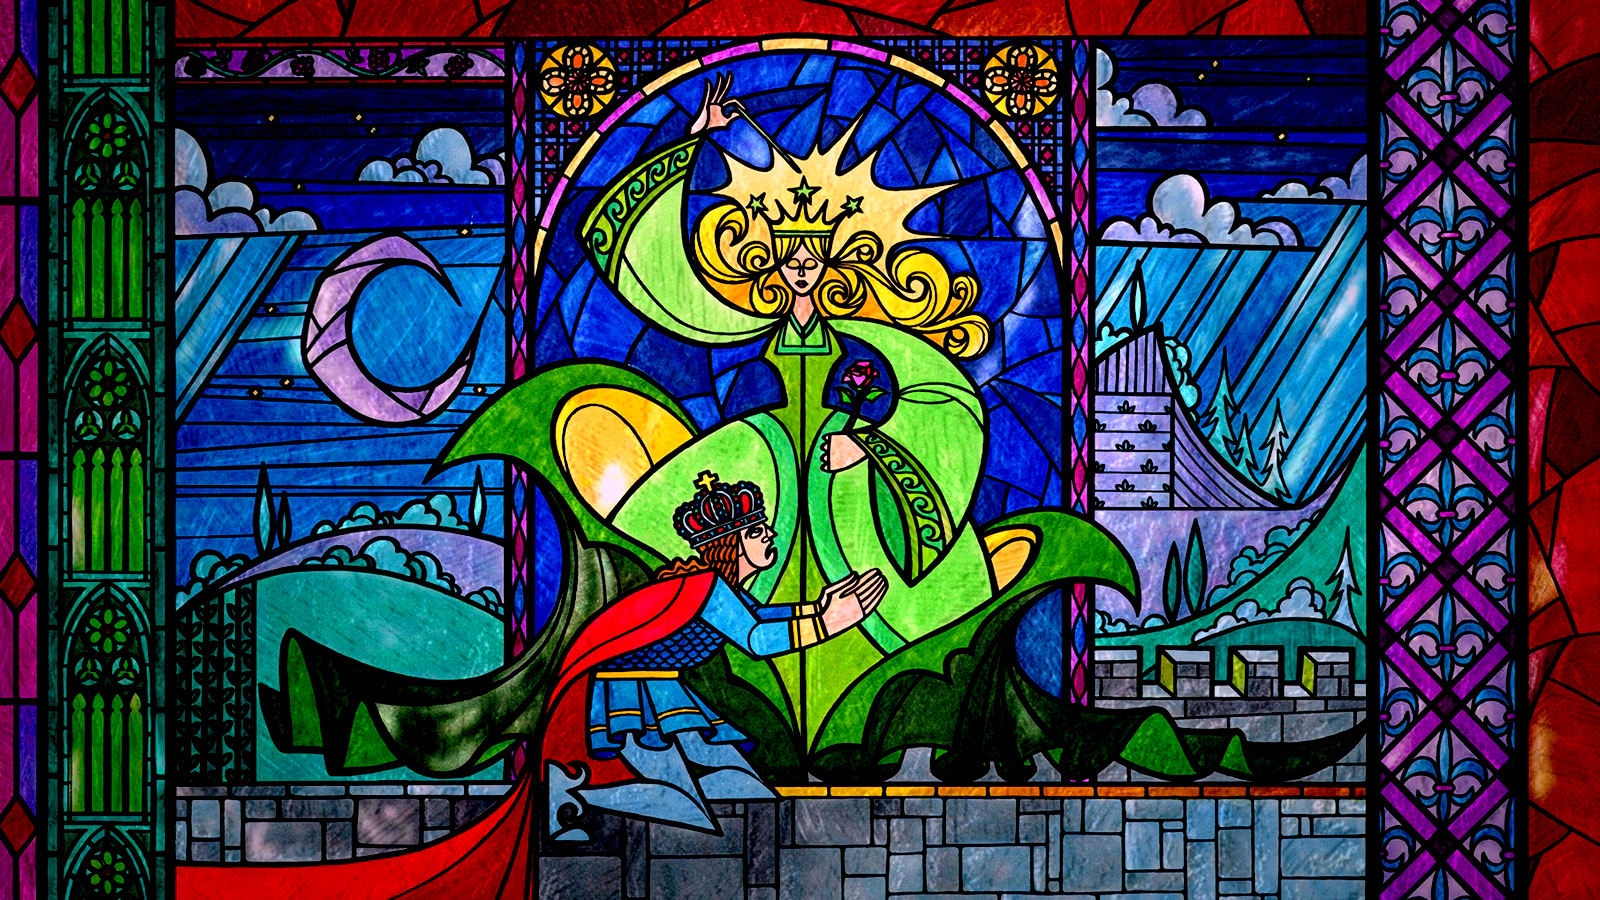 Stained Glass Wallpaper - Beauty And The Beast Stained Glass From Movie - HD Wallpaper 